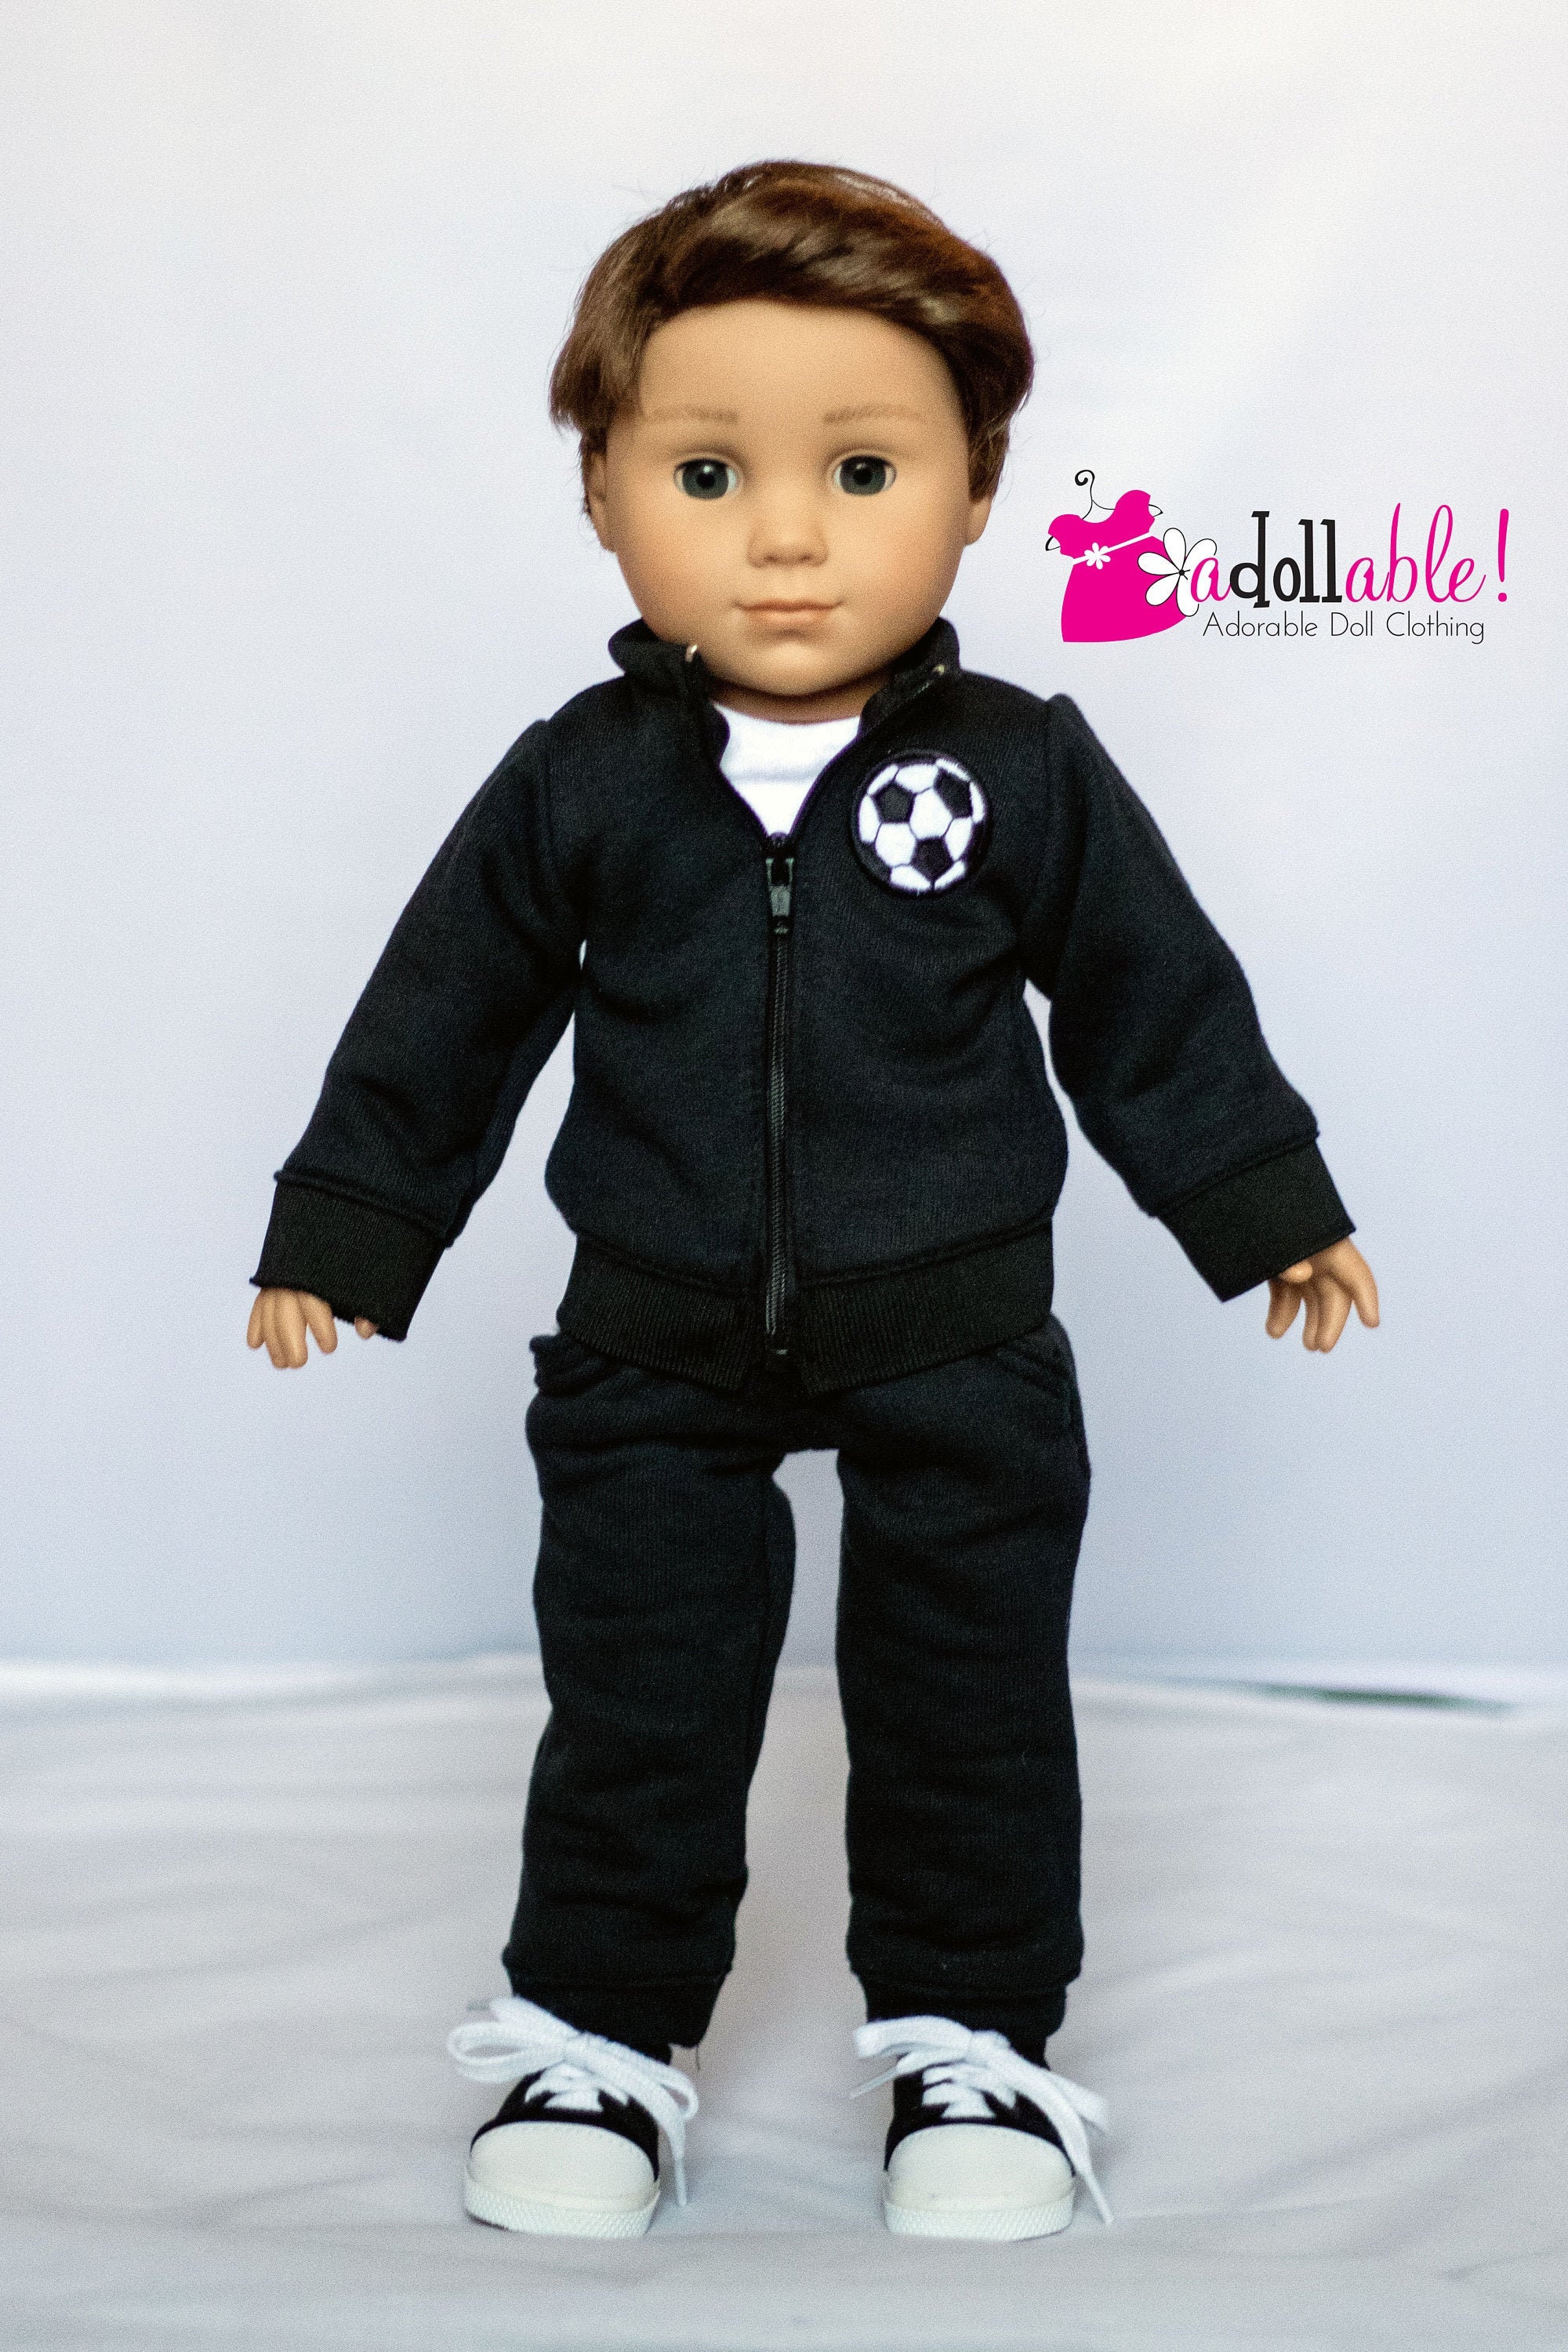 Sophia's Doll Soccer Outfit 6-Piece Set with Ball, Purple #1 Jersey,  Shorts, Socks, Cleats, and Shin…See more Sophia's Doll Soccer Outfit  6-Piece Set